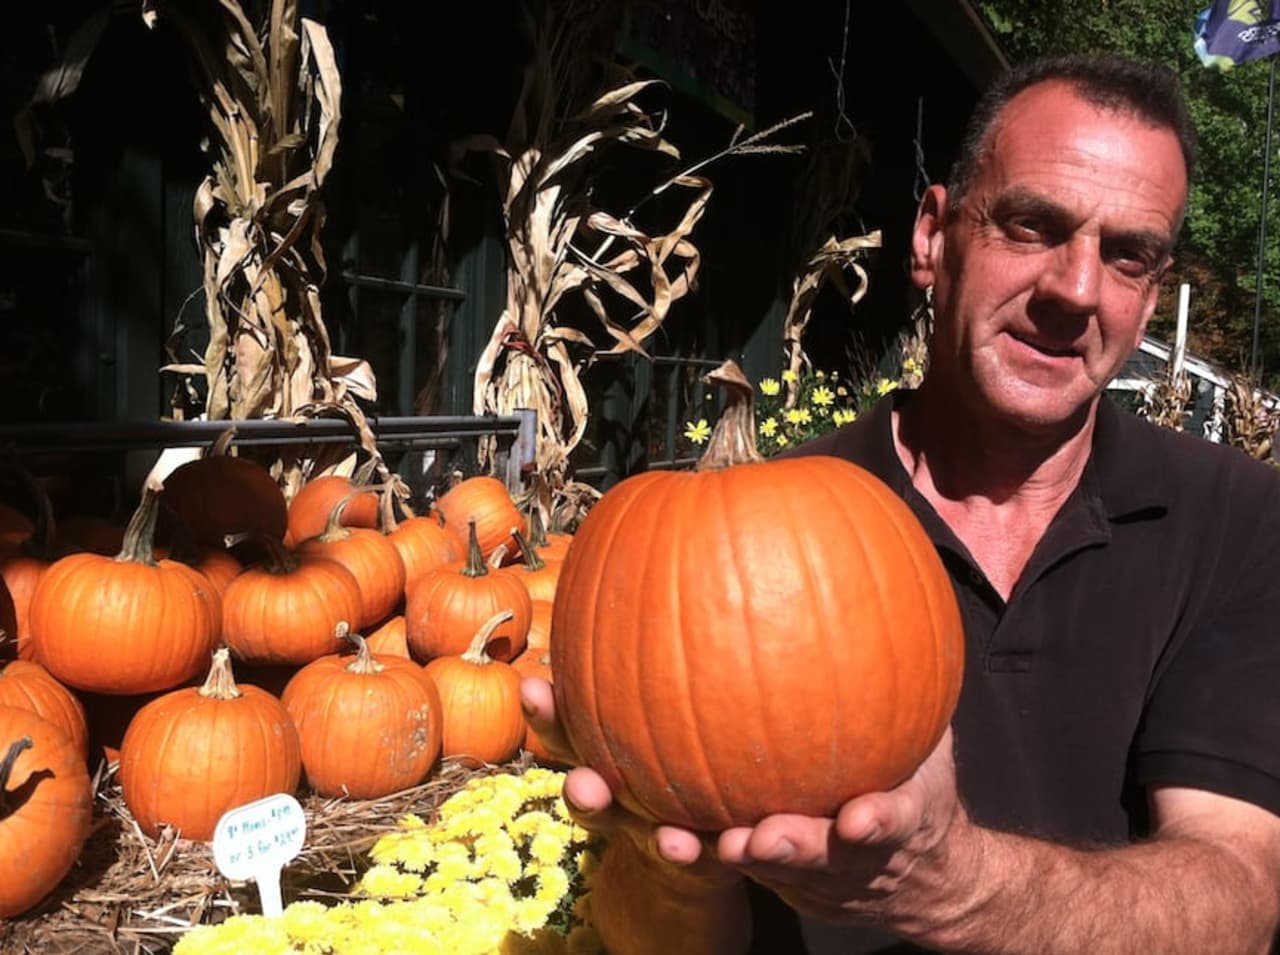 Joseph Basone, manager at Geiger's Home & Garden Center at 259 Frogtown Road in New Canaan, holds up a pumpkin Friday.